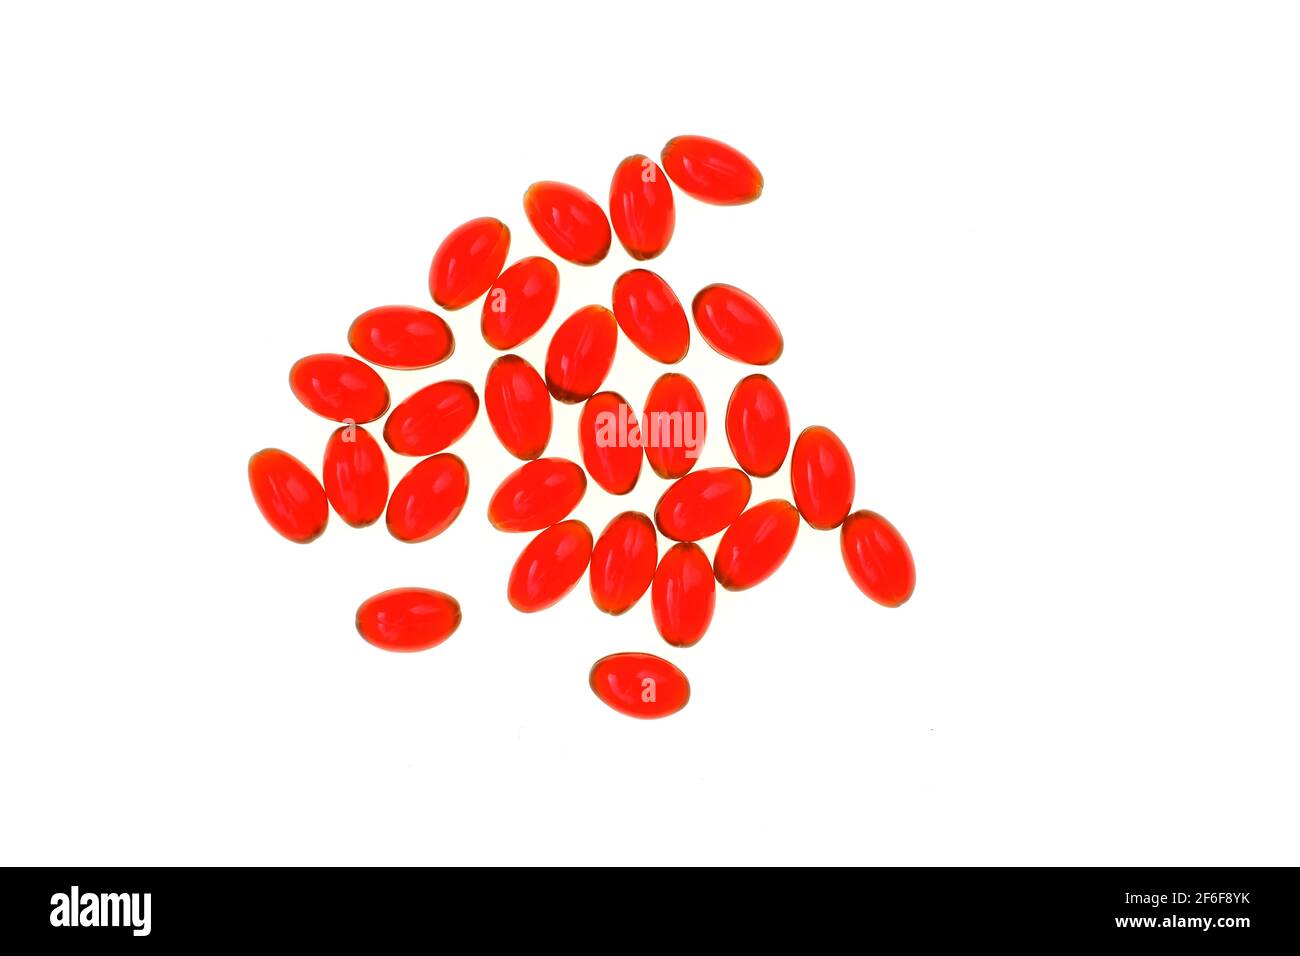 Krill oil red gelatin capsules isolated on white background.Source of omega fatty acids.Healthy food.krill oil supplements Stock Photo